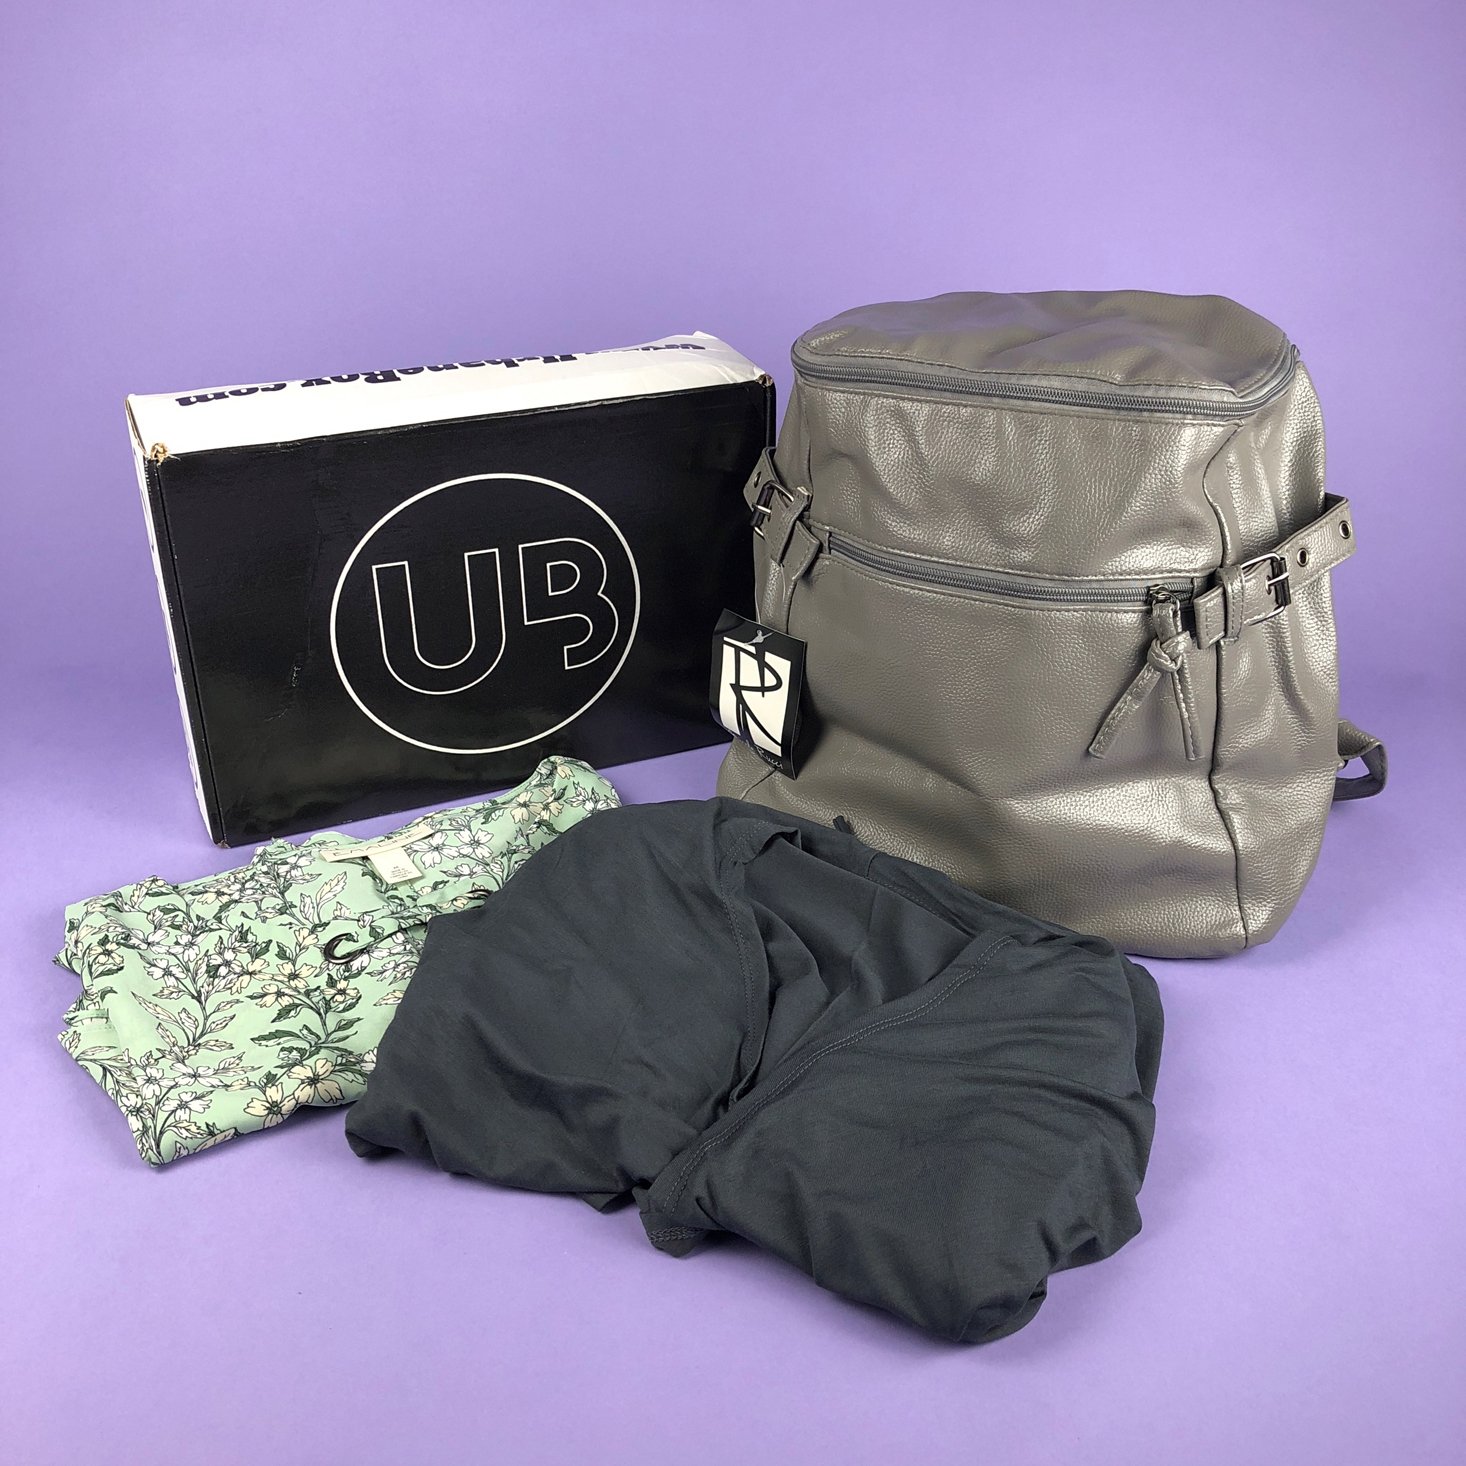 UrbaneBox for Women Clothing Review + Coupon – September 2018